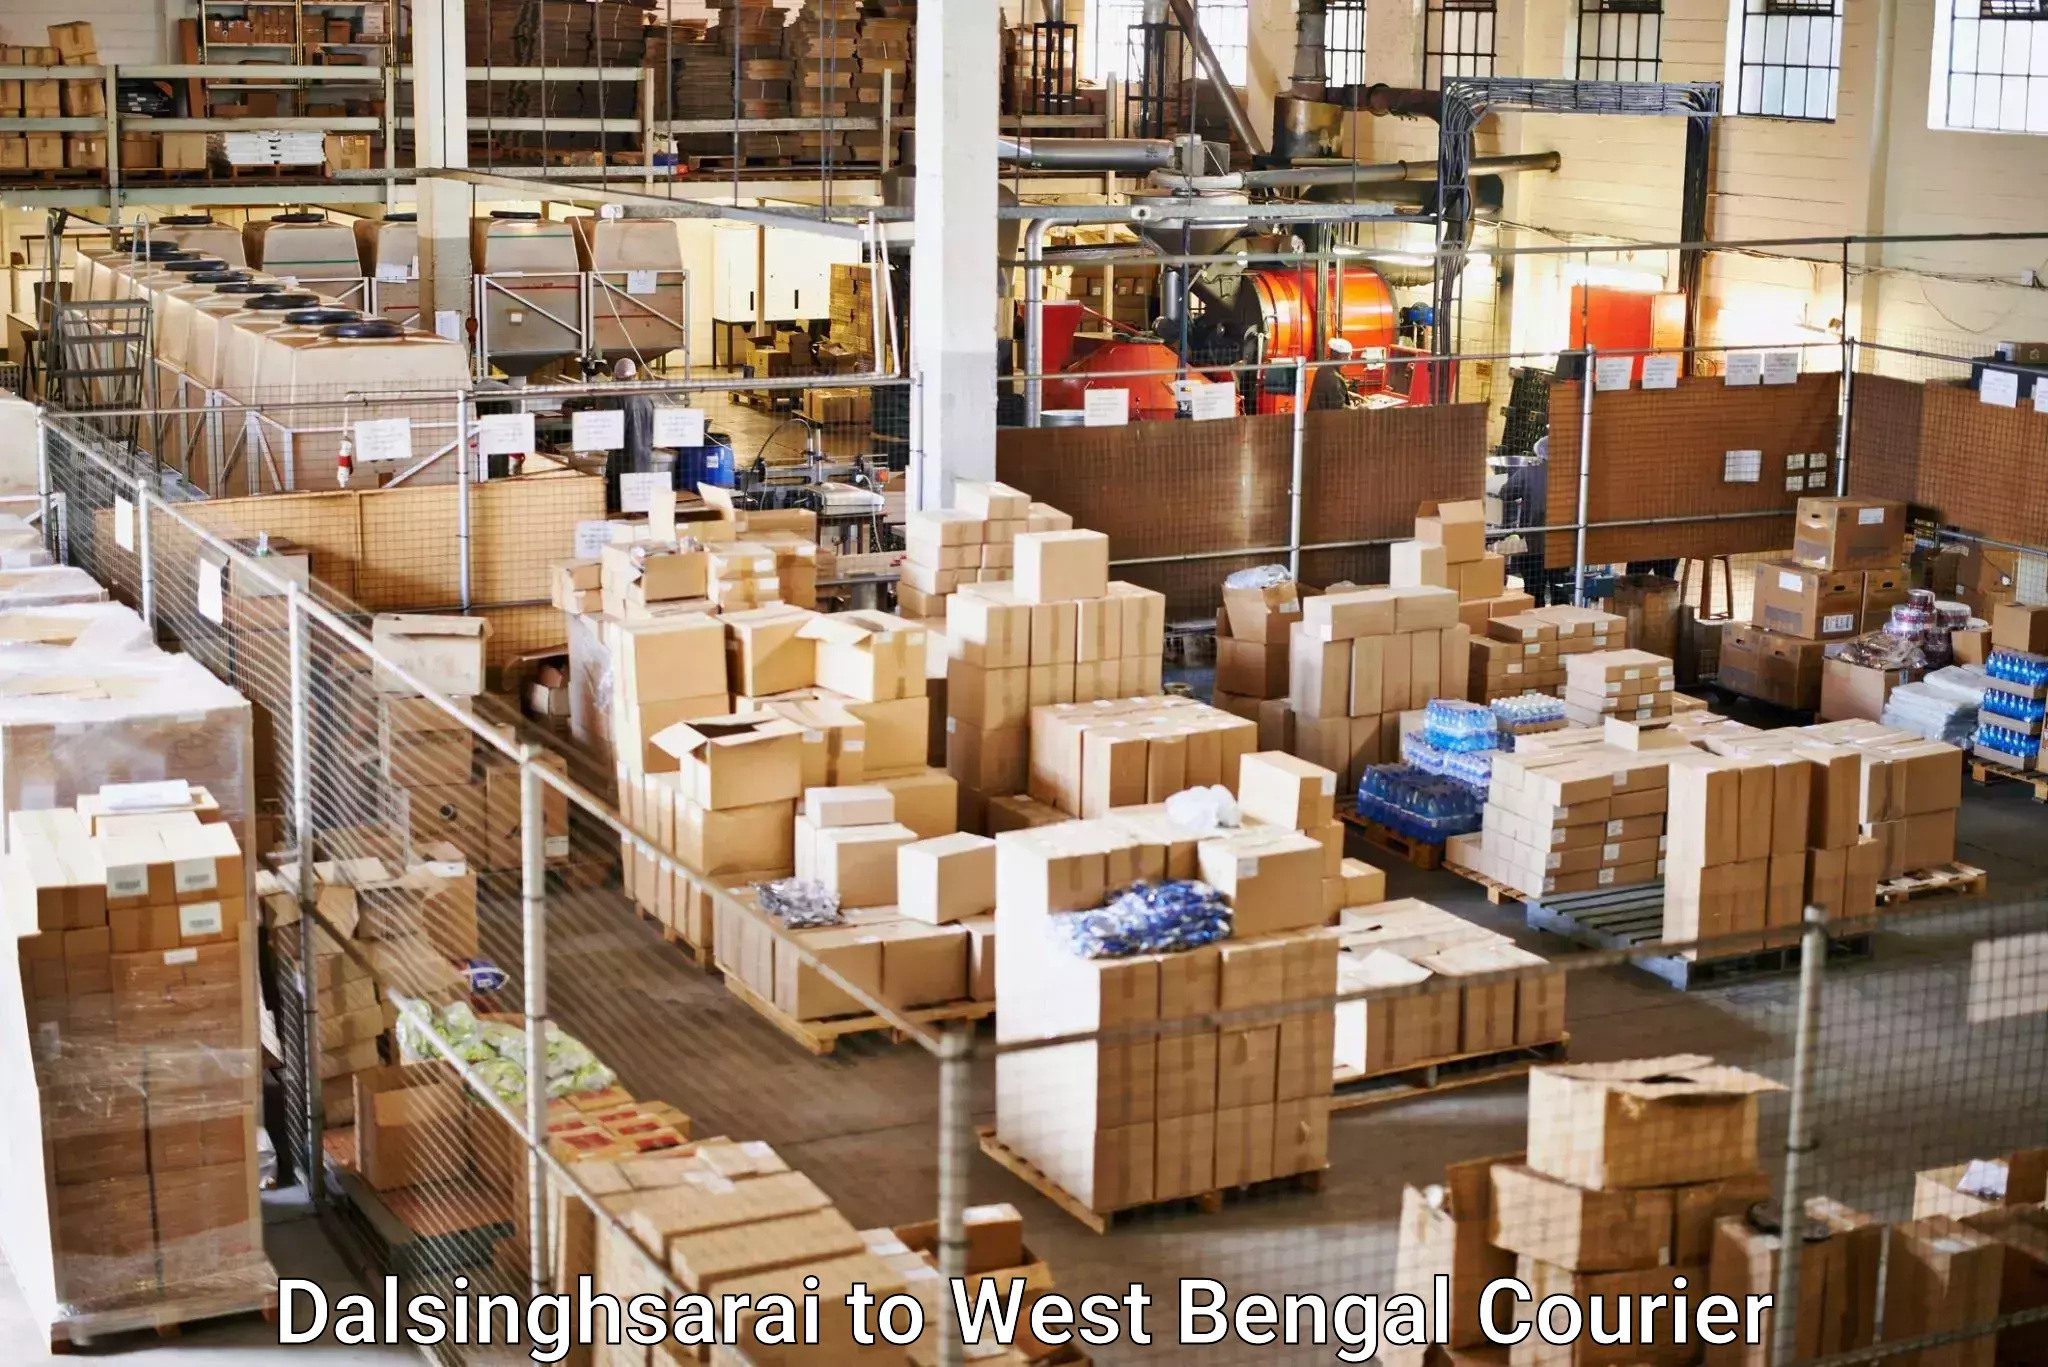 High-speed logistics services Dalsinghsarai to West Bengal